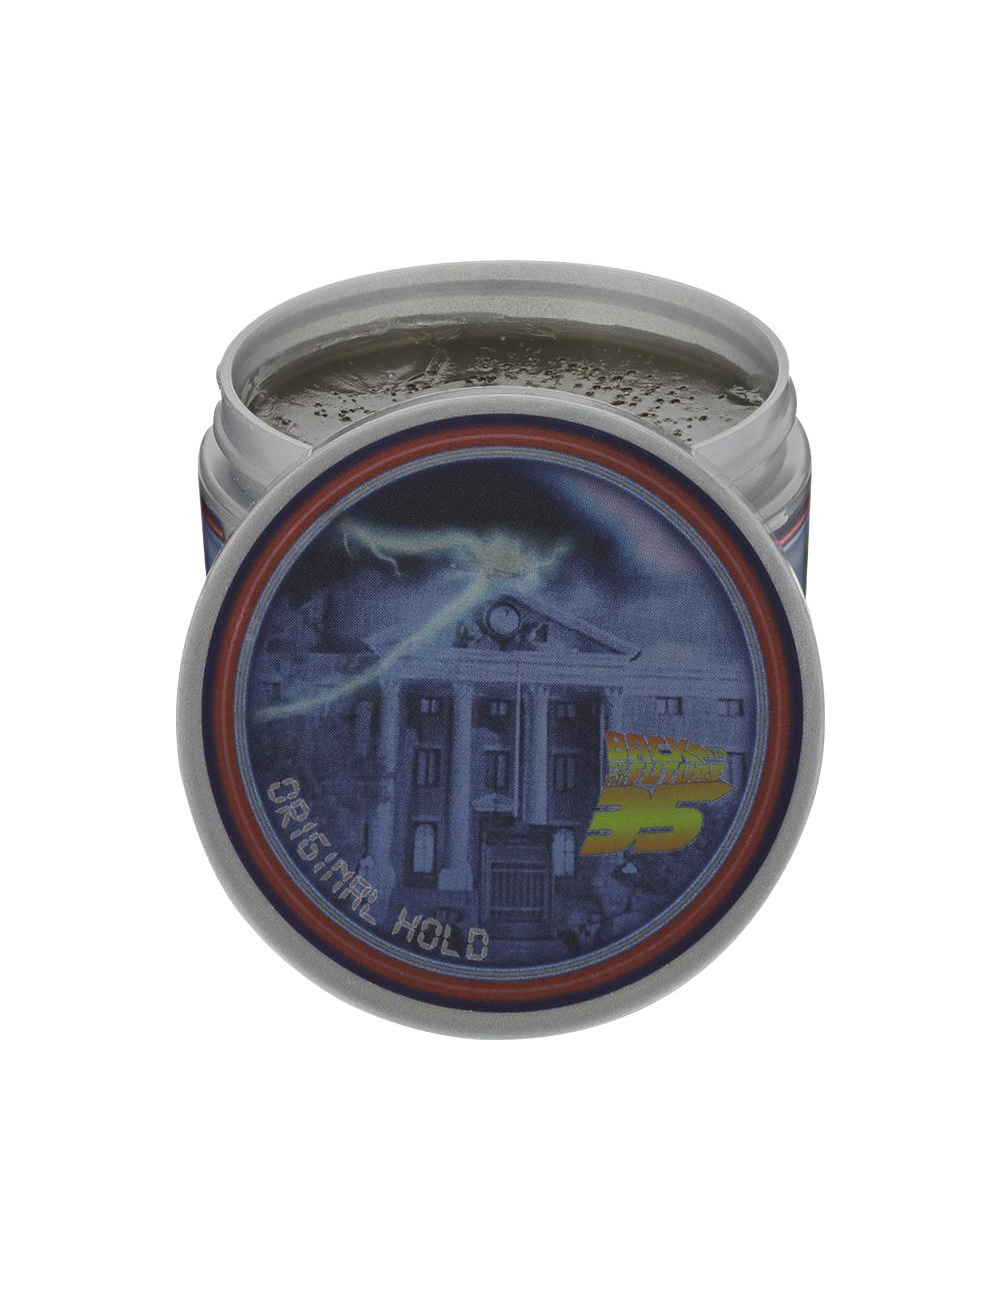 Back to the Future 35th Anniversary Original Hold Pomade